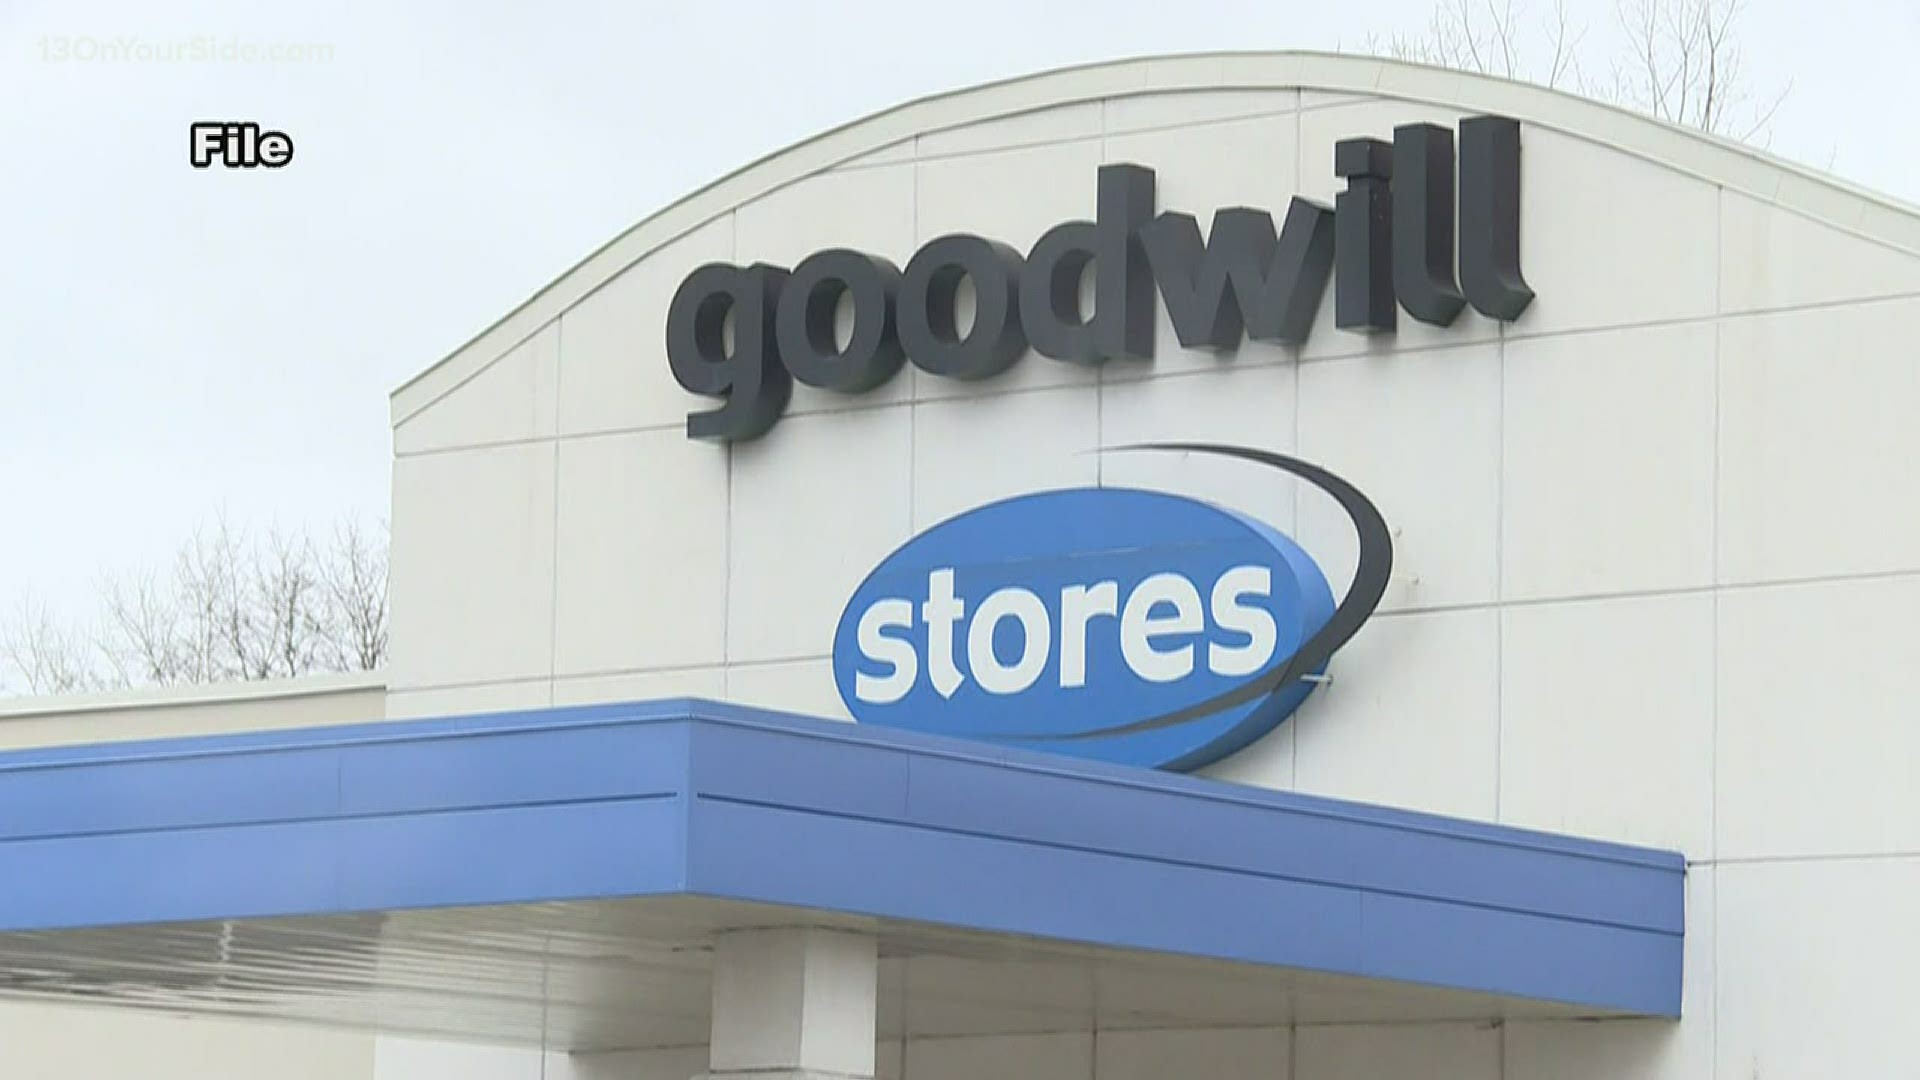 Goodwill stores along the lakeshore accepting drop-off ...